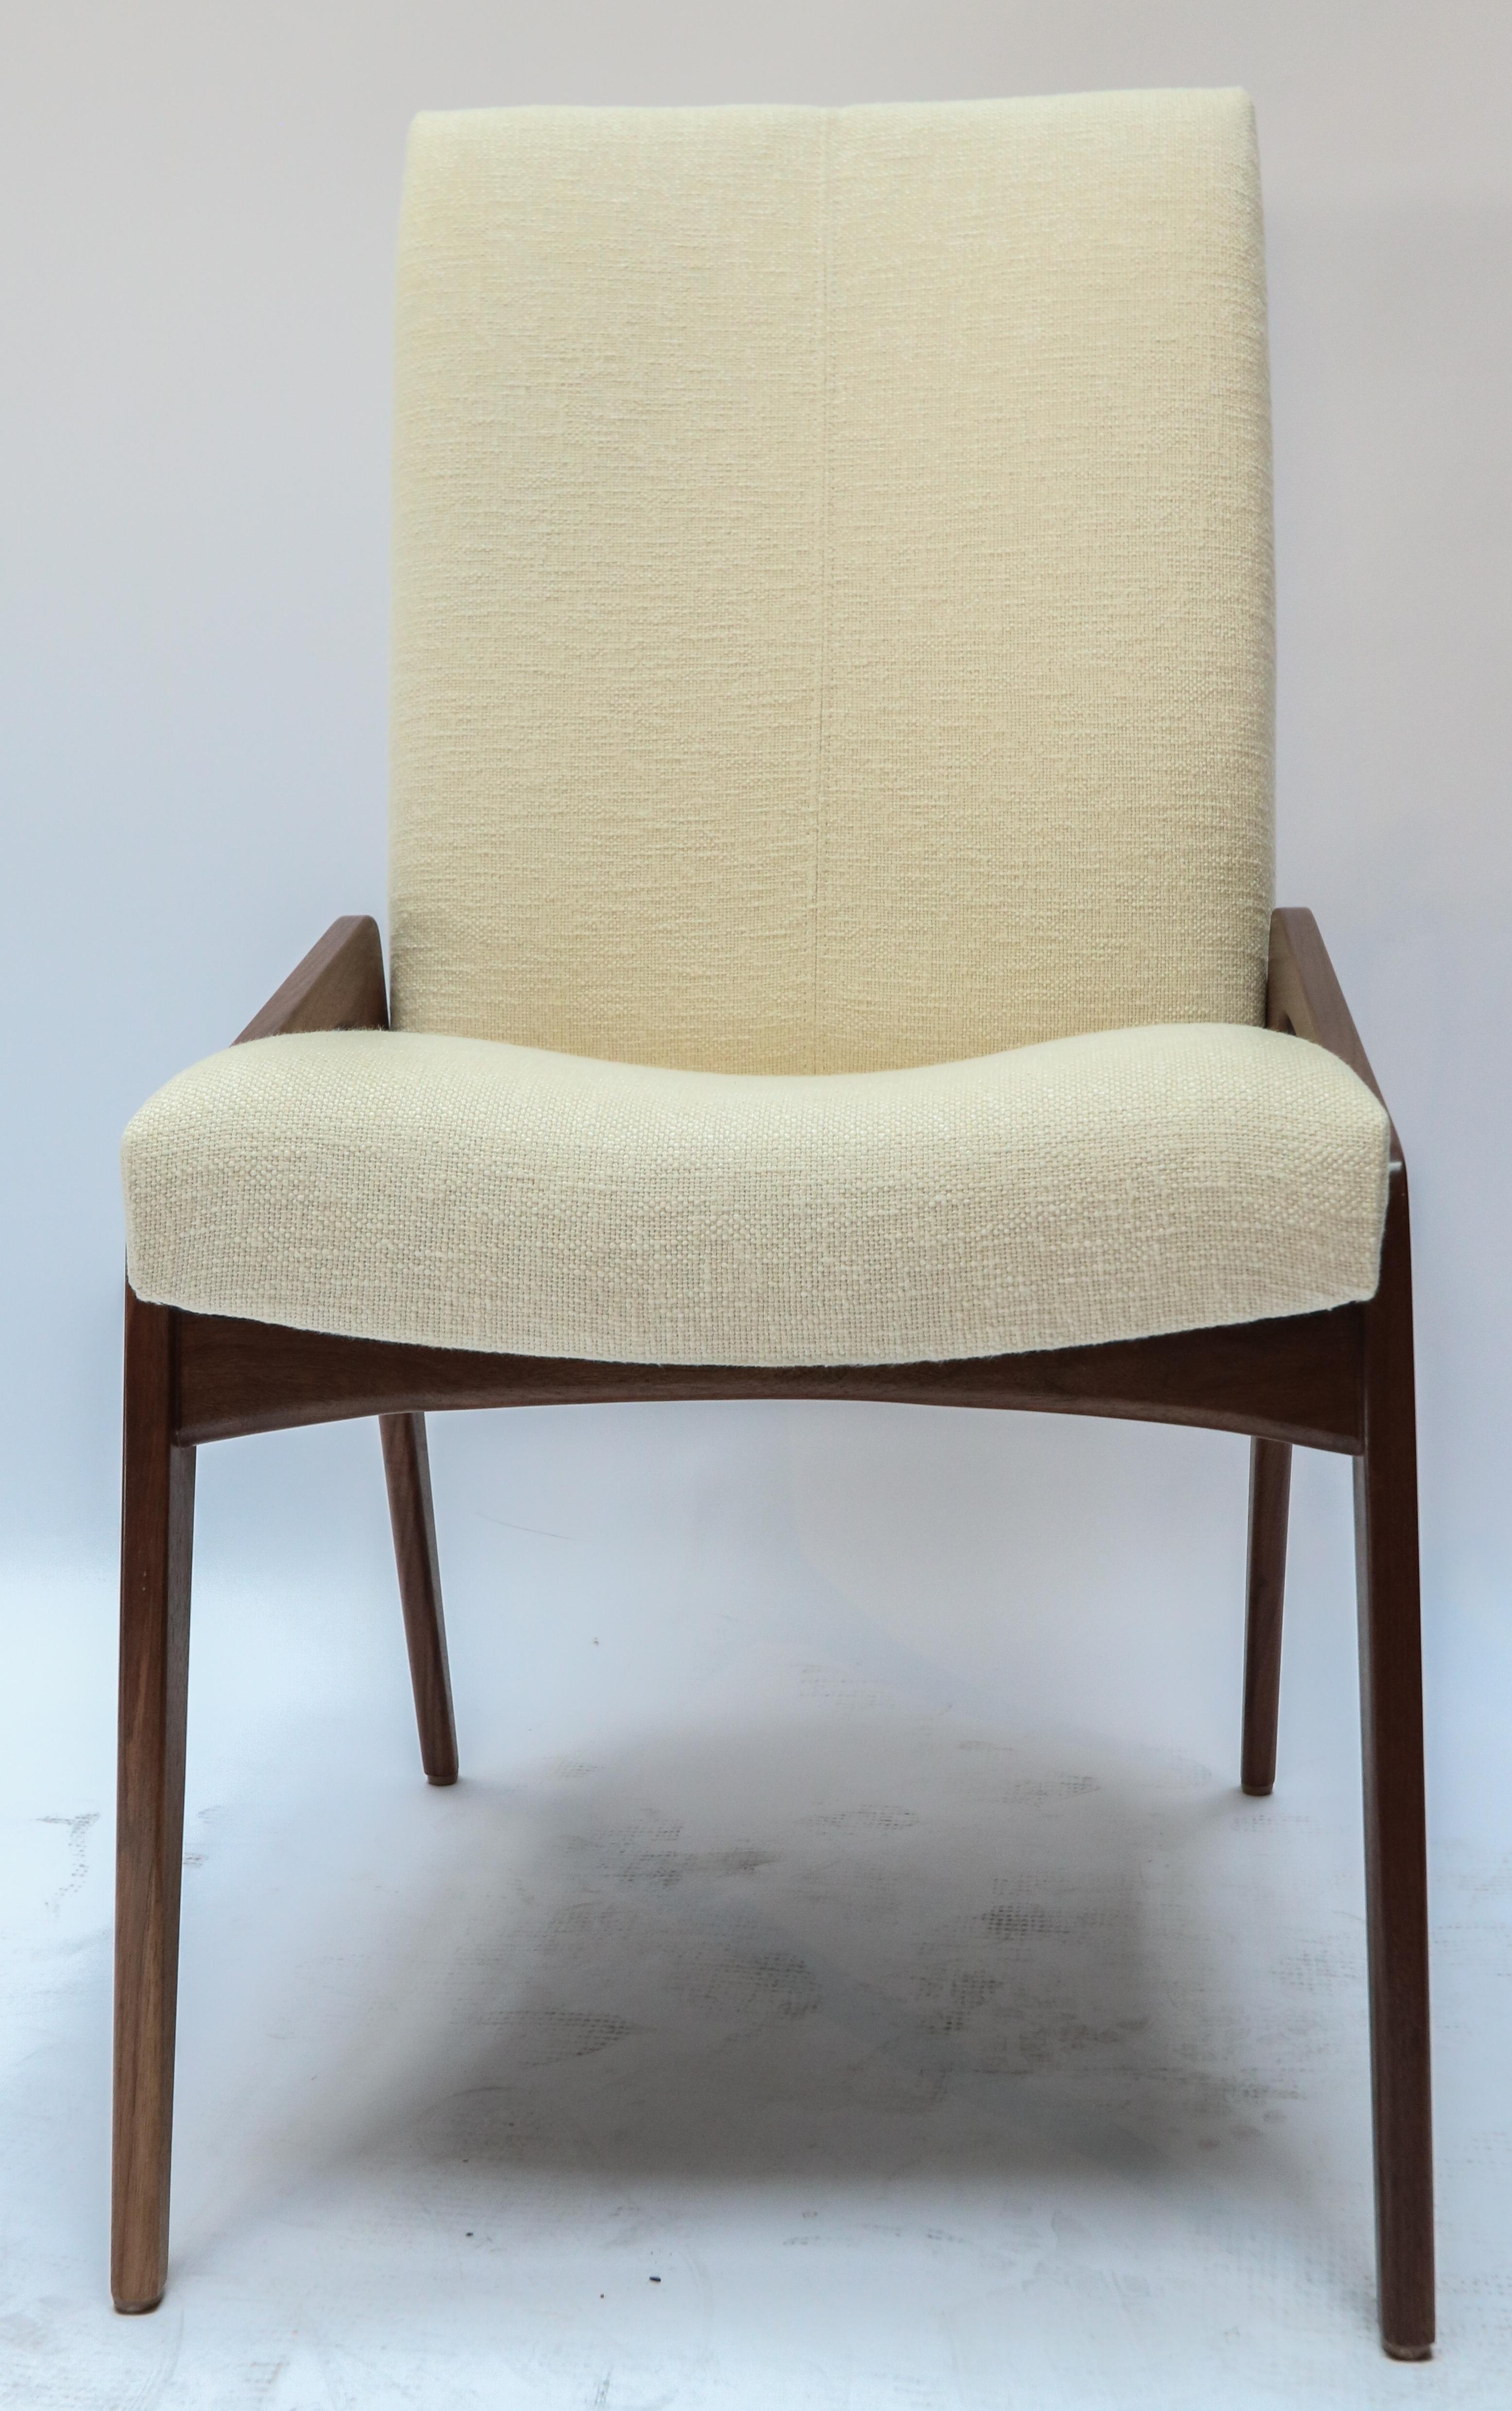 Contemporary Custom Midcentury Style Walnut Dining Chairs in Ivory Linen by Adesso Imports For Sale